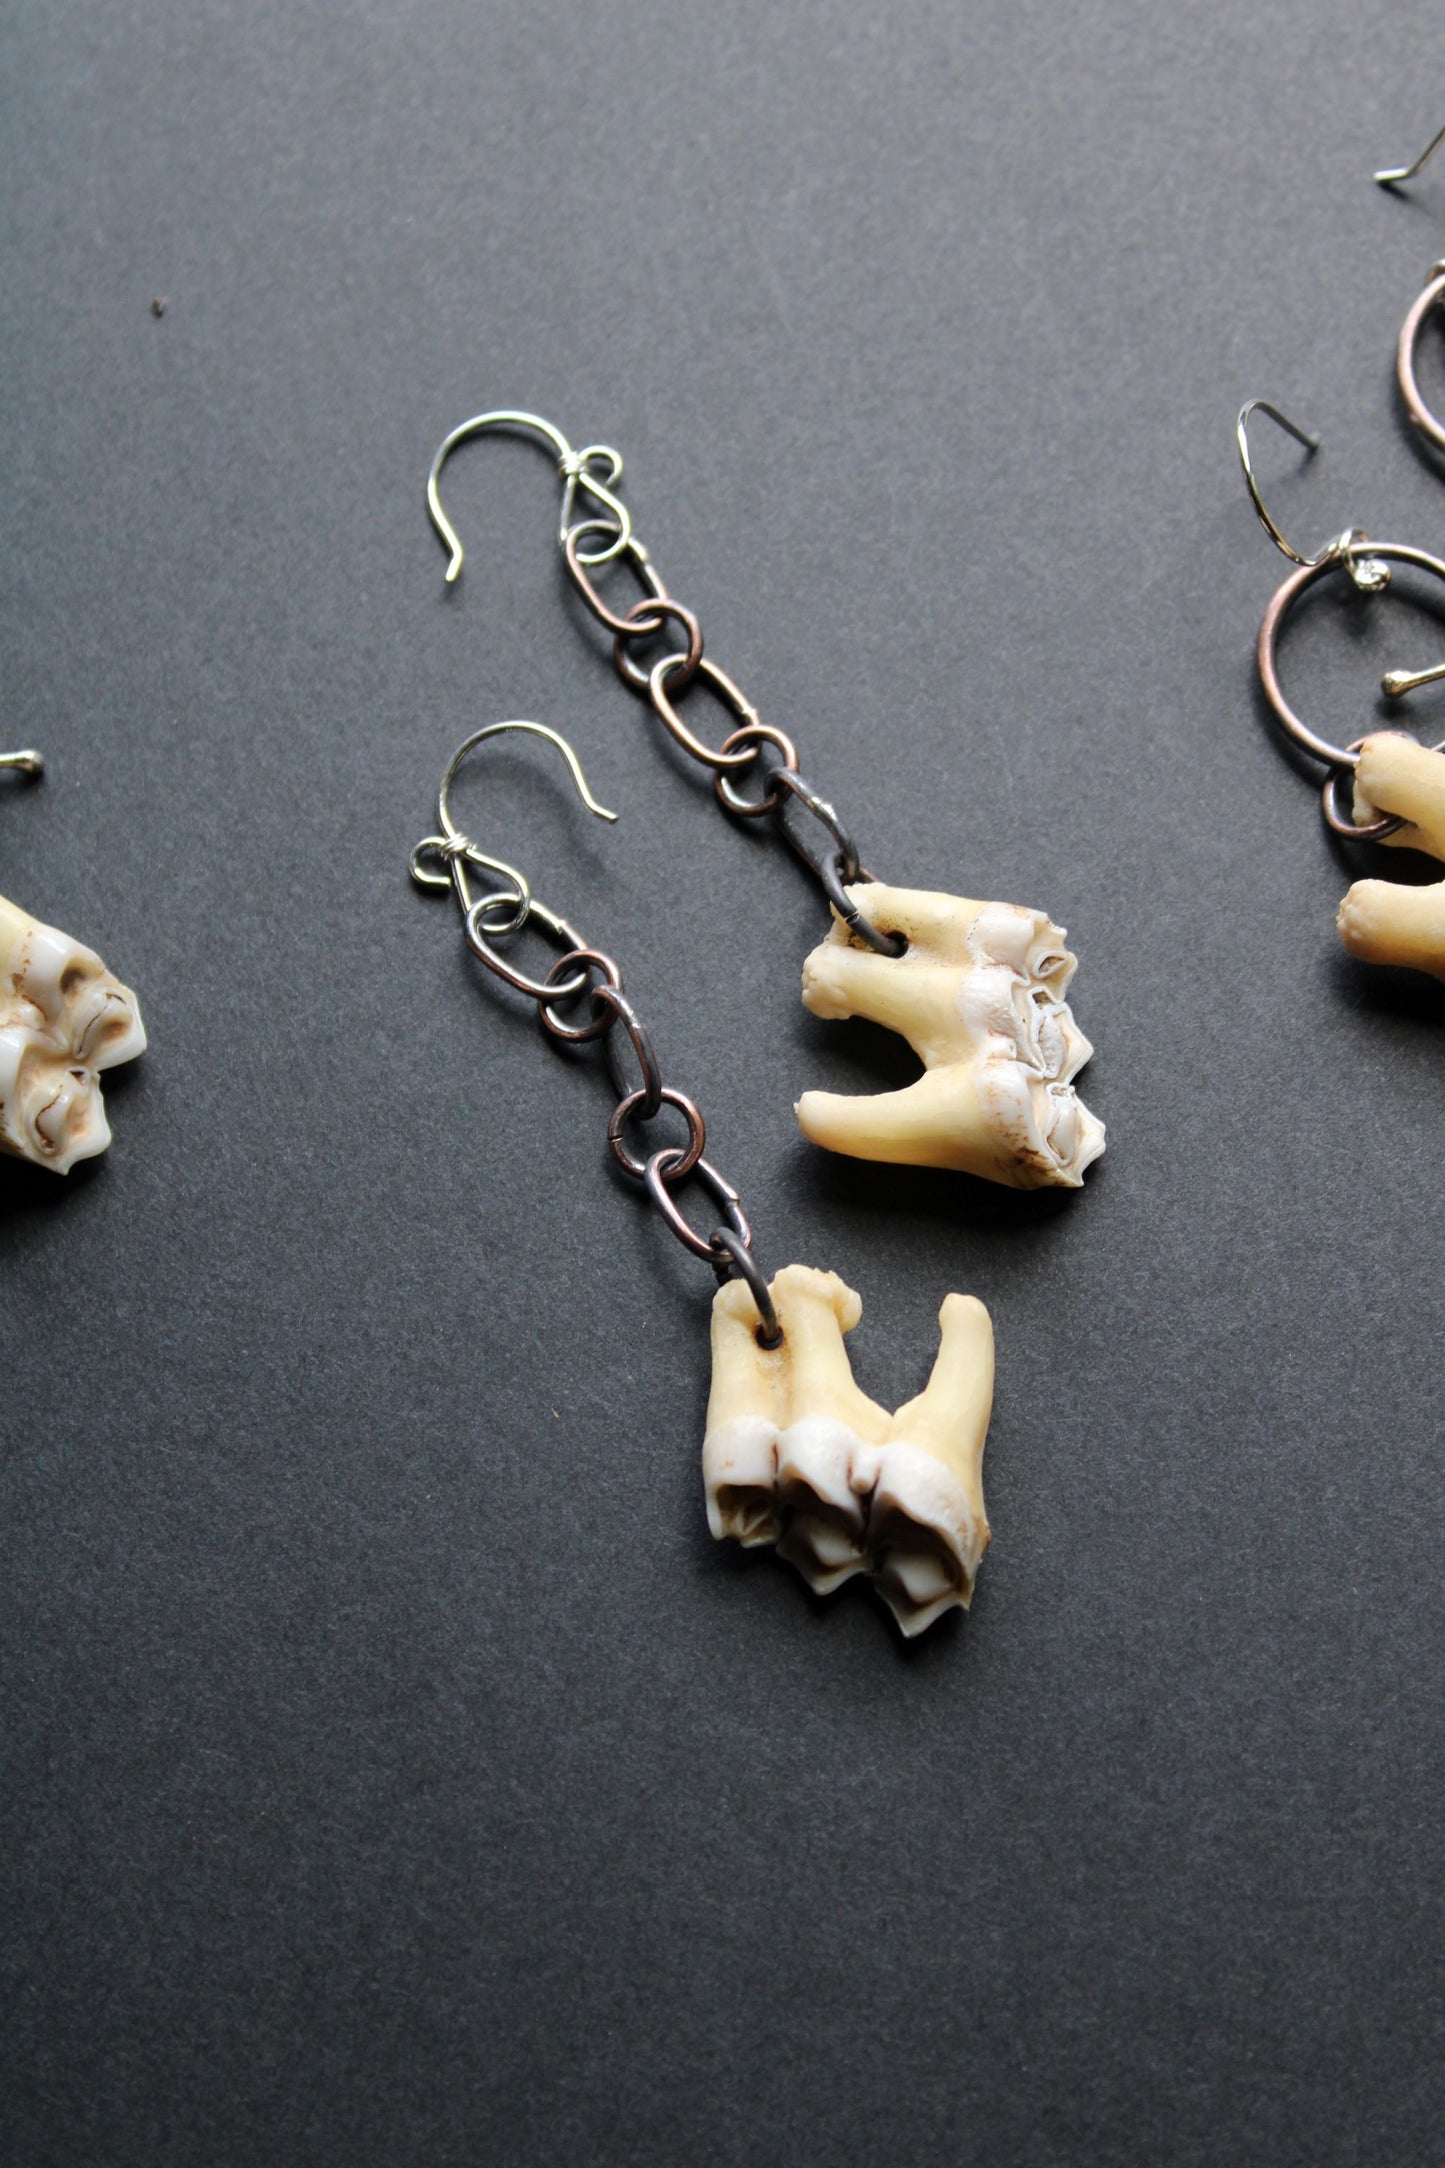 post apocalyptic earth, ear necklace, necklace of apocalypse now, apocalyptic bone jewelry, post apocalyptic jewelry, one of a kind bone jewelry, one of a kind bone earrings, one of a kind bone earrings jewelry,  Cruelty free bone jewelry, handmade bone jewelry, taxidermy jewelry, forest collected bone, forest collected bone jewelry, collection bone jewelry